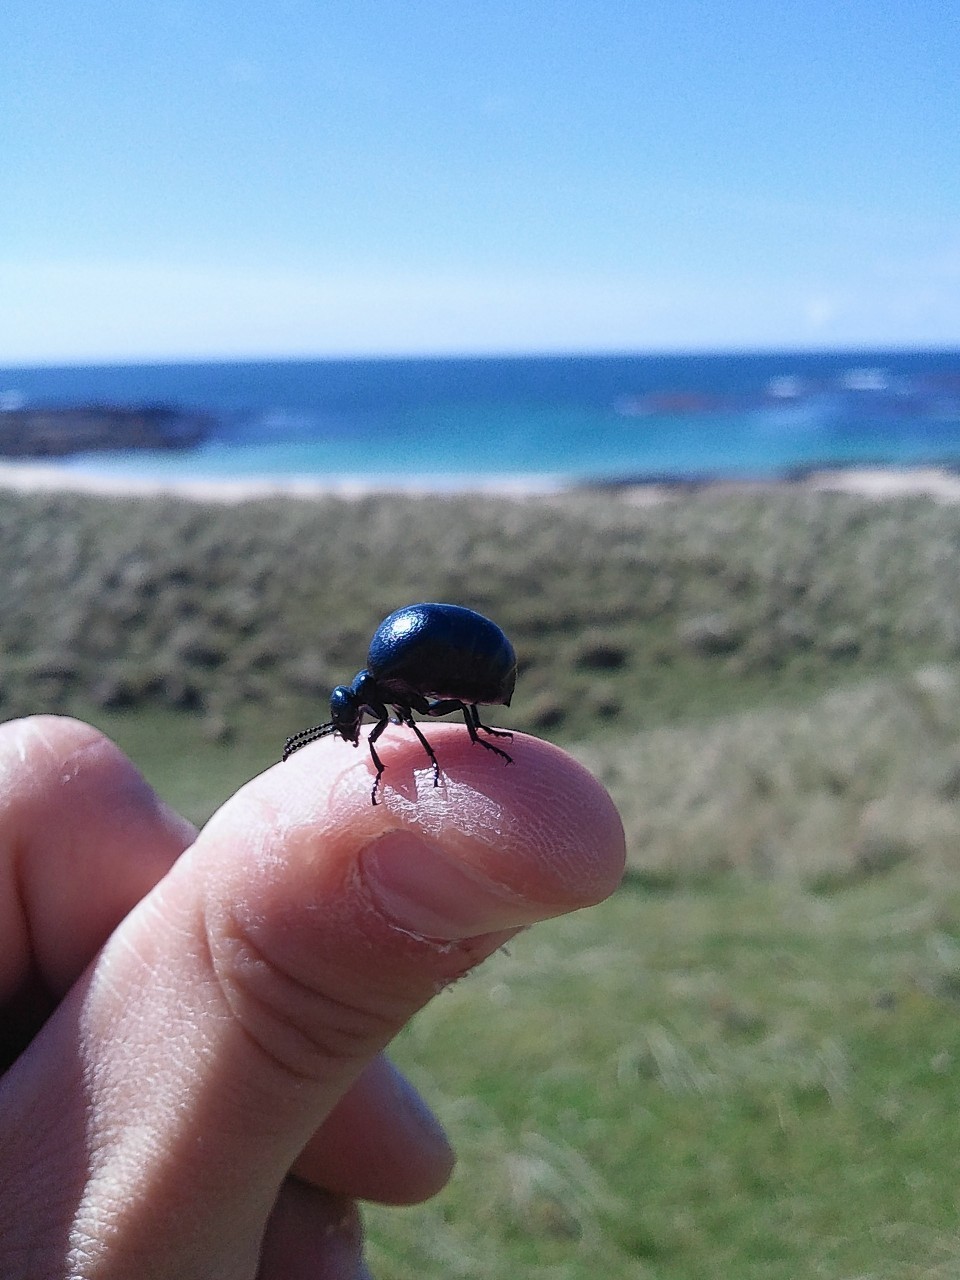 The rare beetle found on Coll